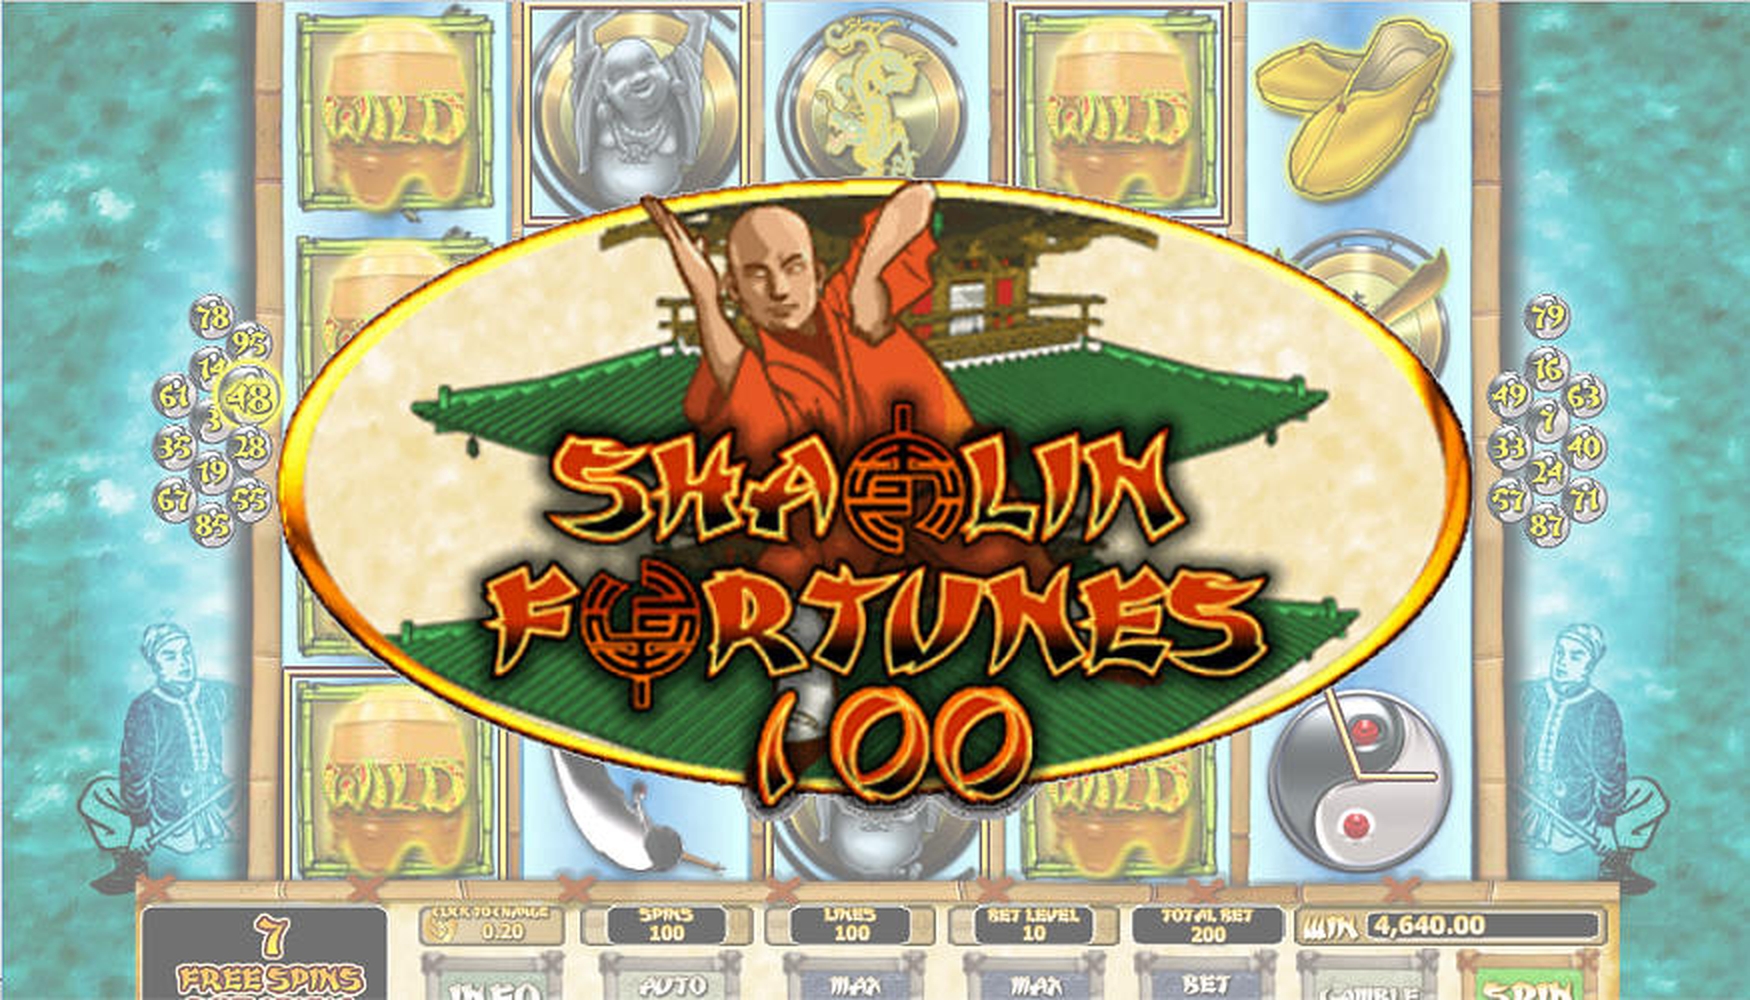 The Shaolin Fortunes 100 Online Slot Demo Game by Habanero